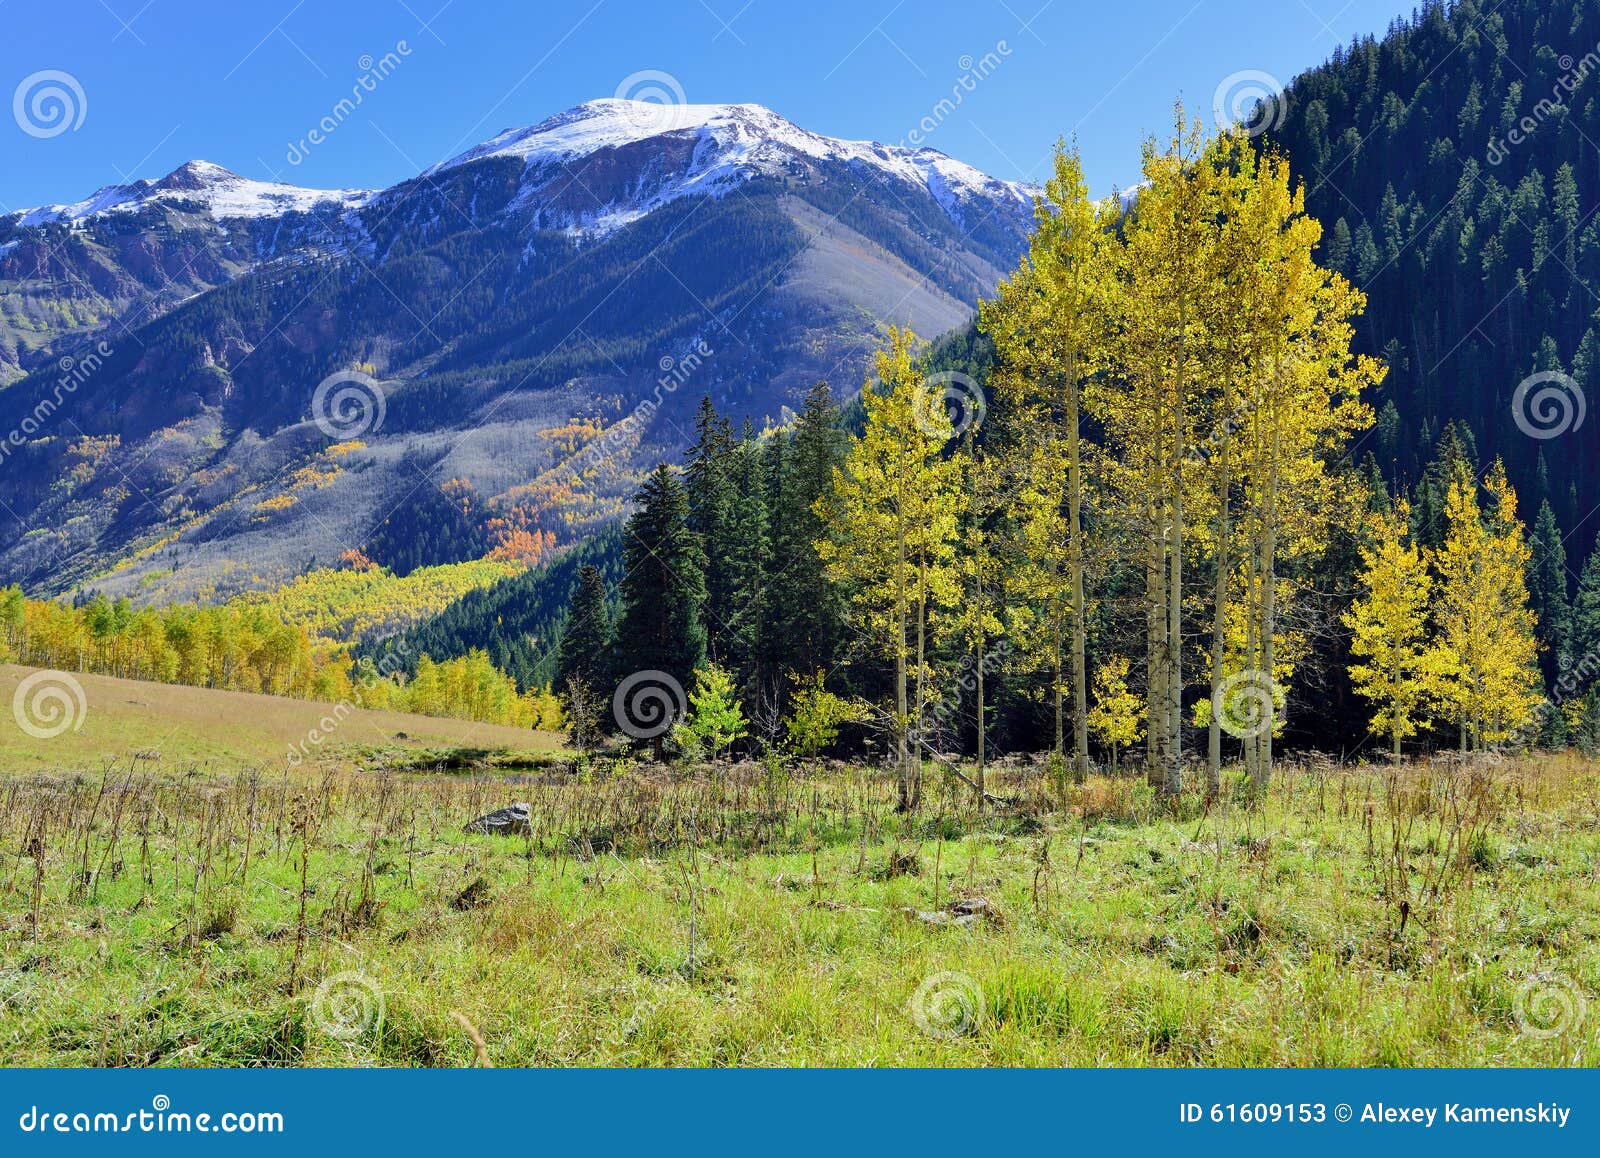 Snow Covered Mountains With Colorful Aspen During Foliage Season Stock